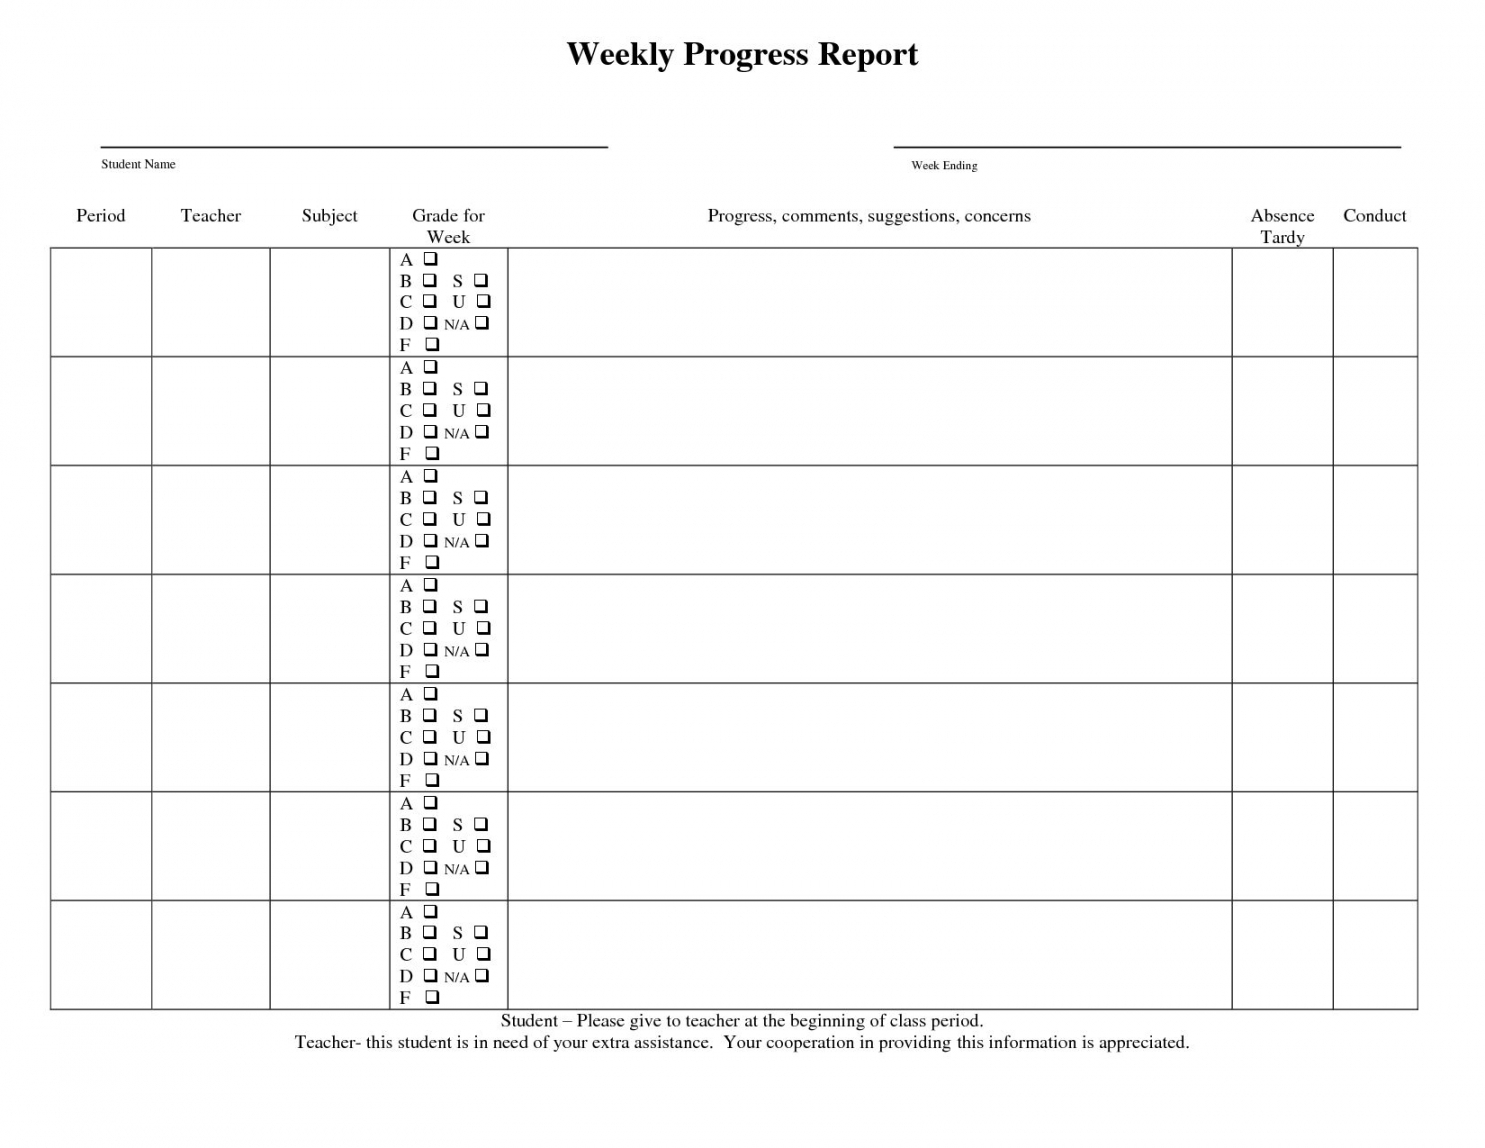 Daily Progress Report Format Excel Construction Glendale With Regard To Construction Daily Progress Report Template